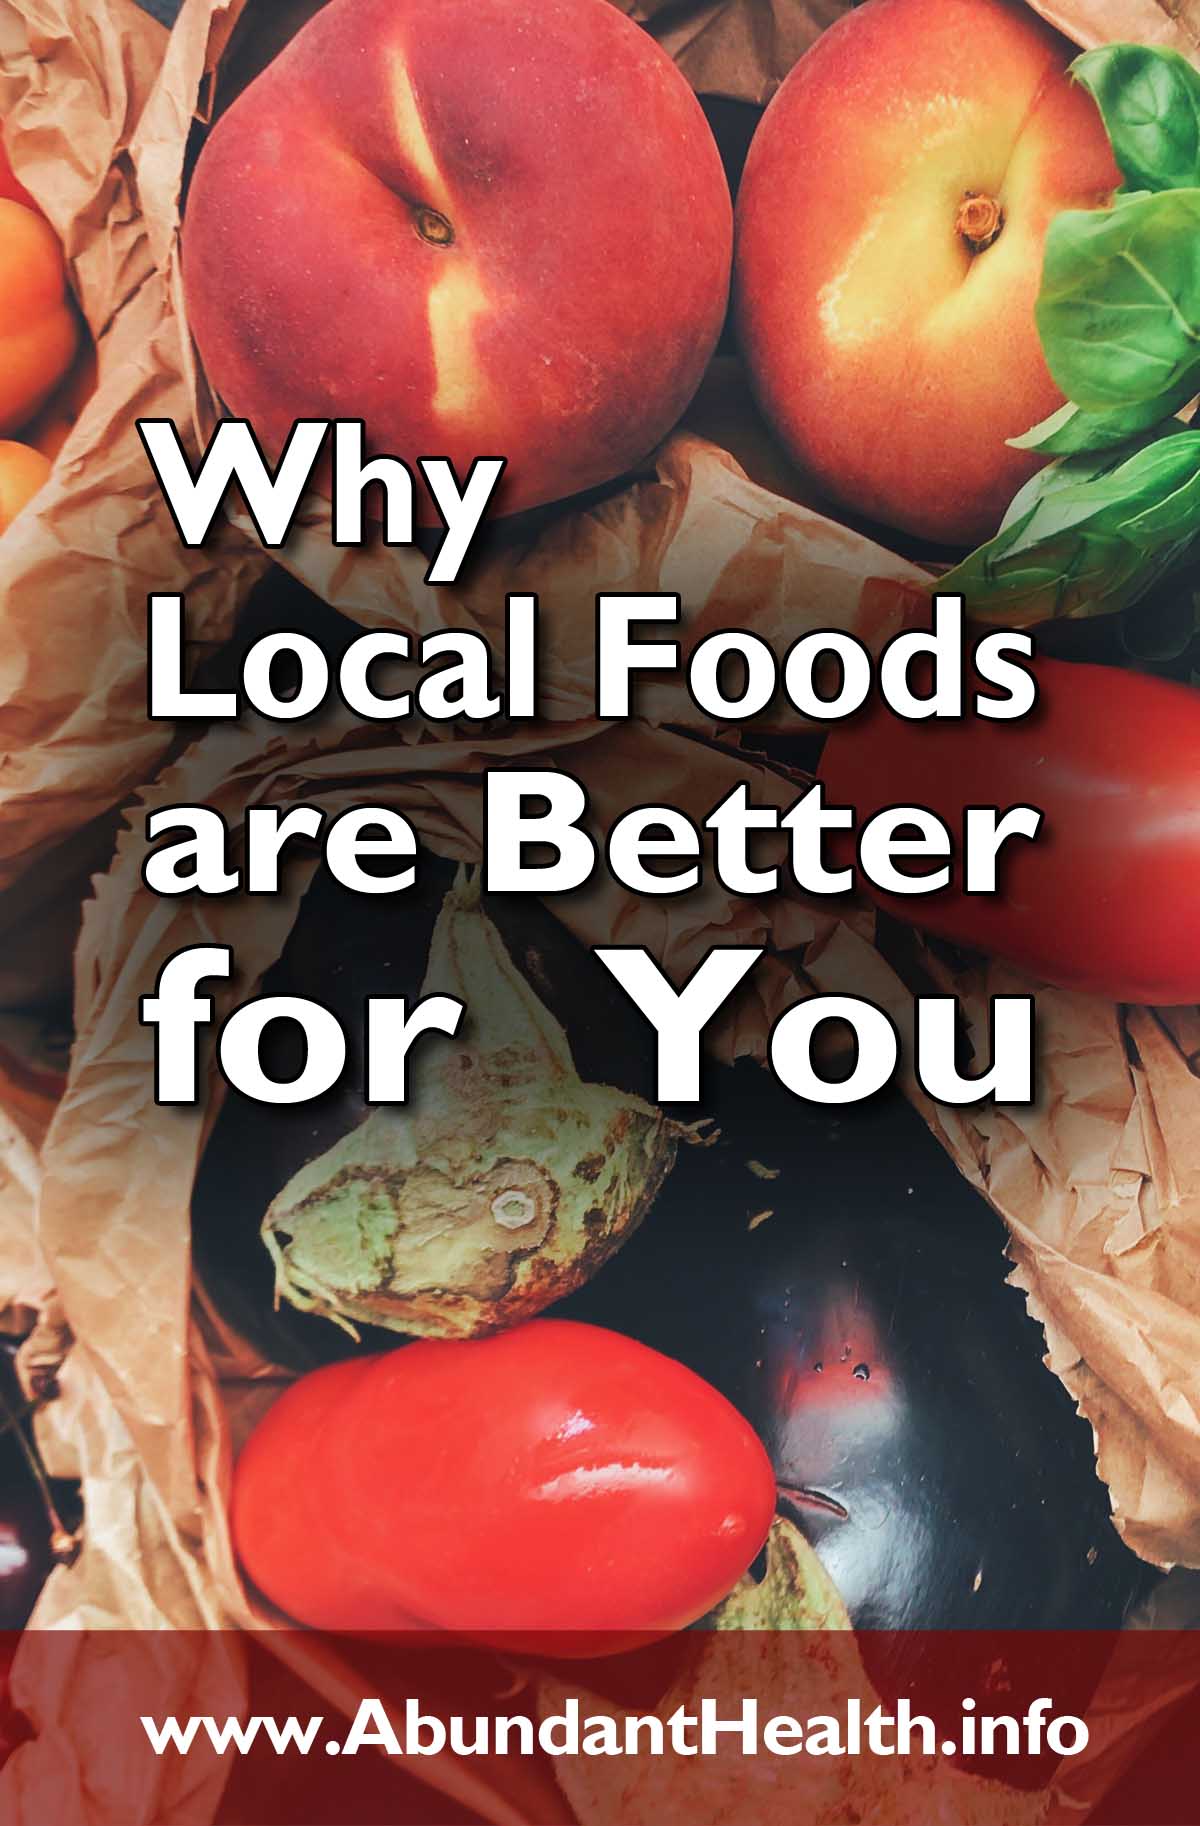 Why Local Foods are Better for You